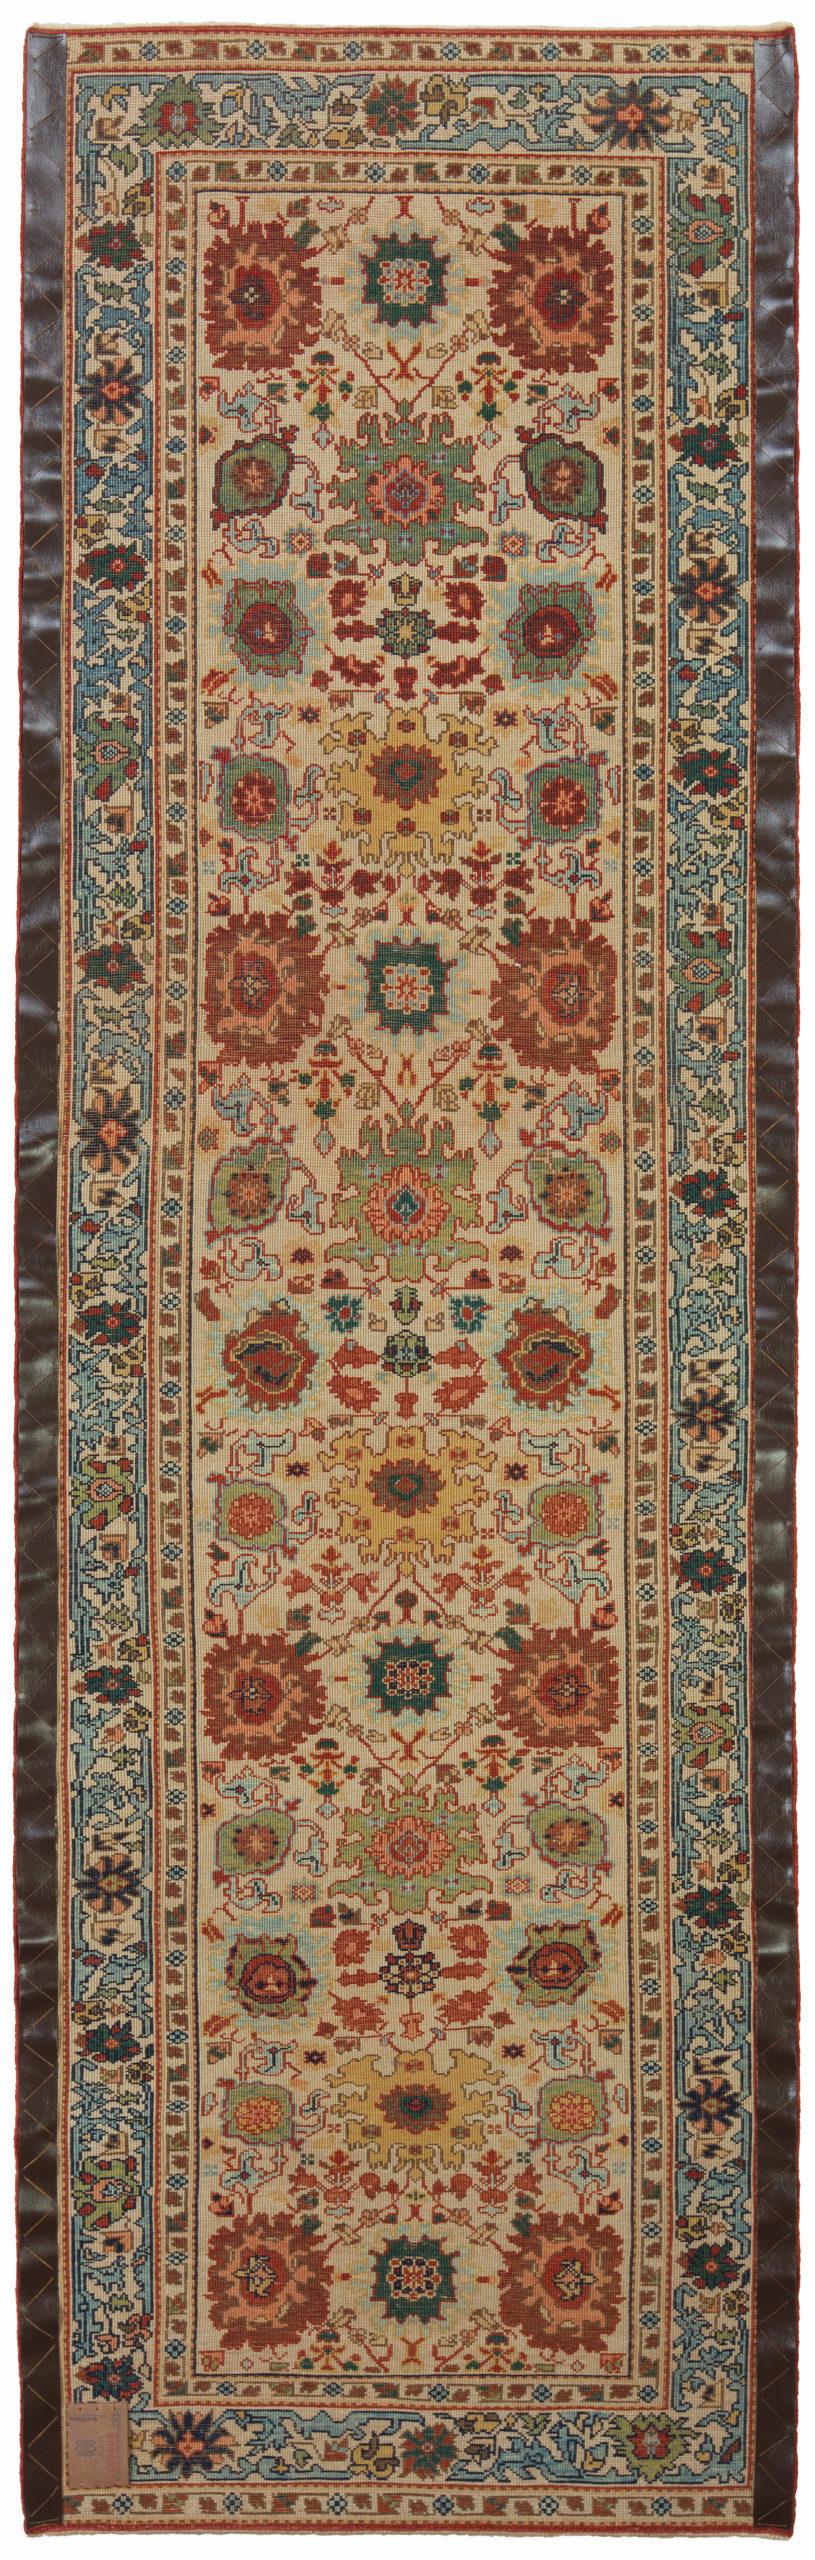 This offset pattern is composed of palmettes and flowers, one has the impression that it is only part of a larger scheme designed 19th-century rug from the Bidjar region, Eastern Kurdistan area. Very similar palmettes, drawn in a curvilinear manner